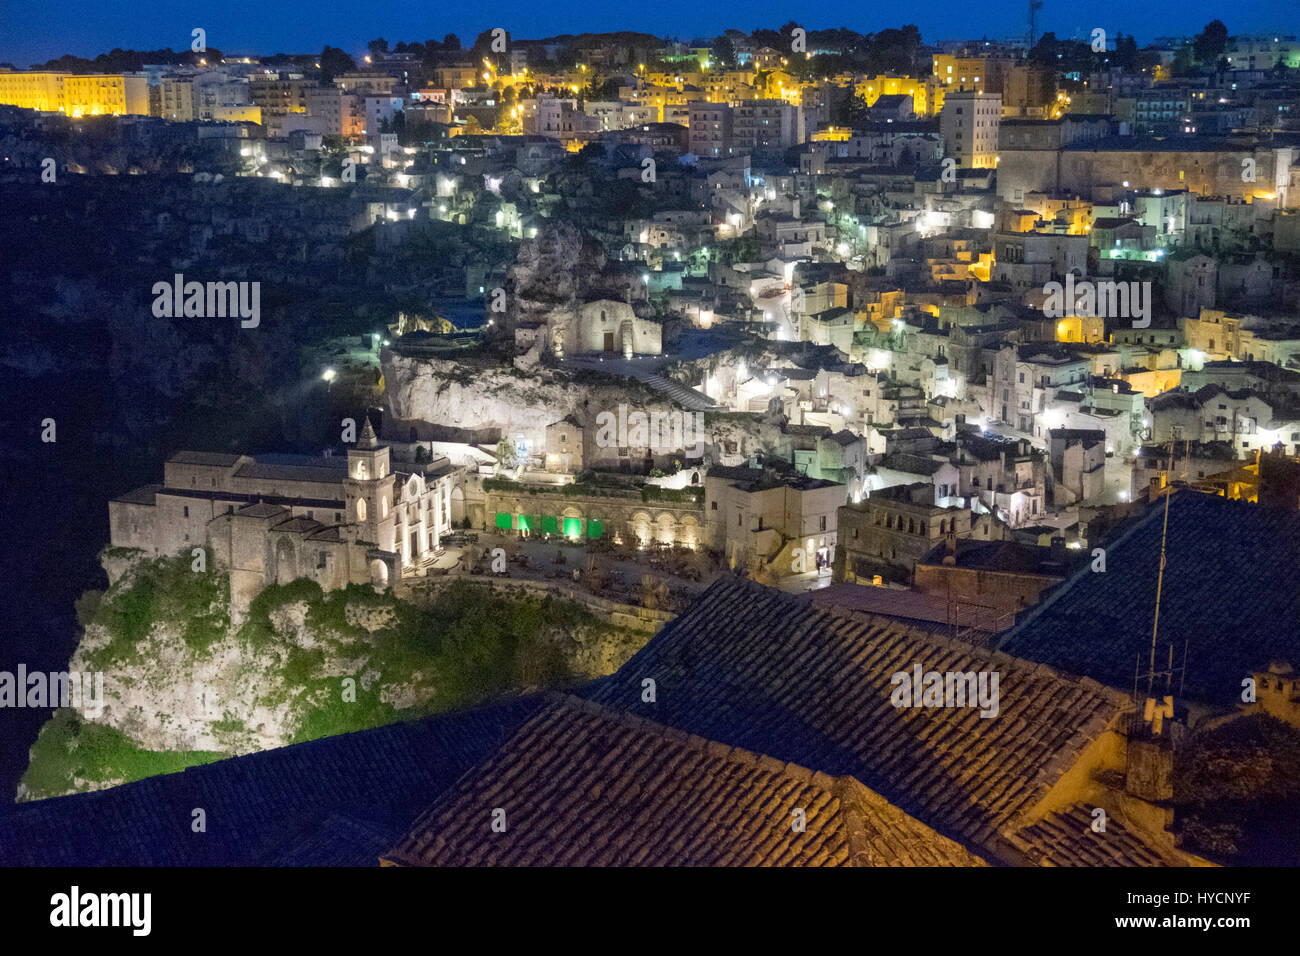 Night view of the city of Matera, Italy, European Capital of Culture for 2019 Stock Photo